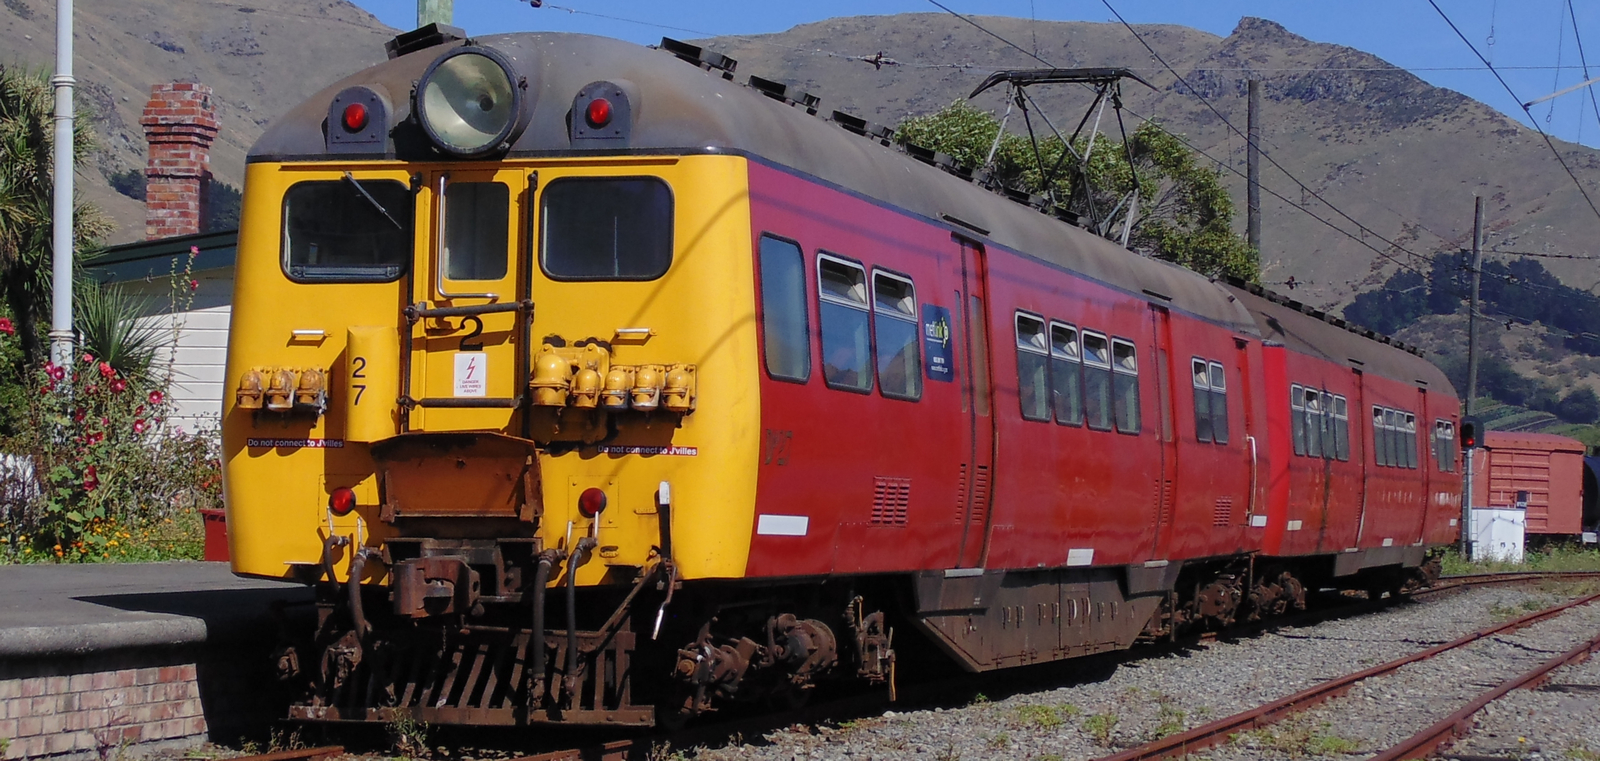 Dm 27 and D 163 in March 2016 in Ferrymead